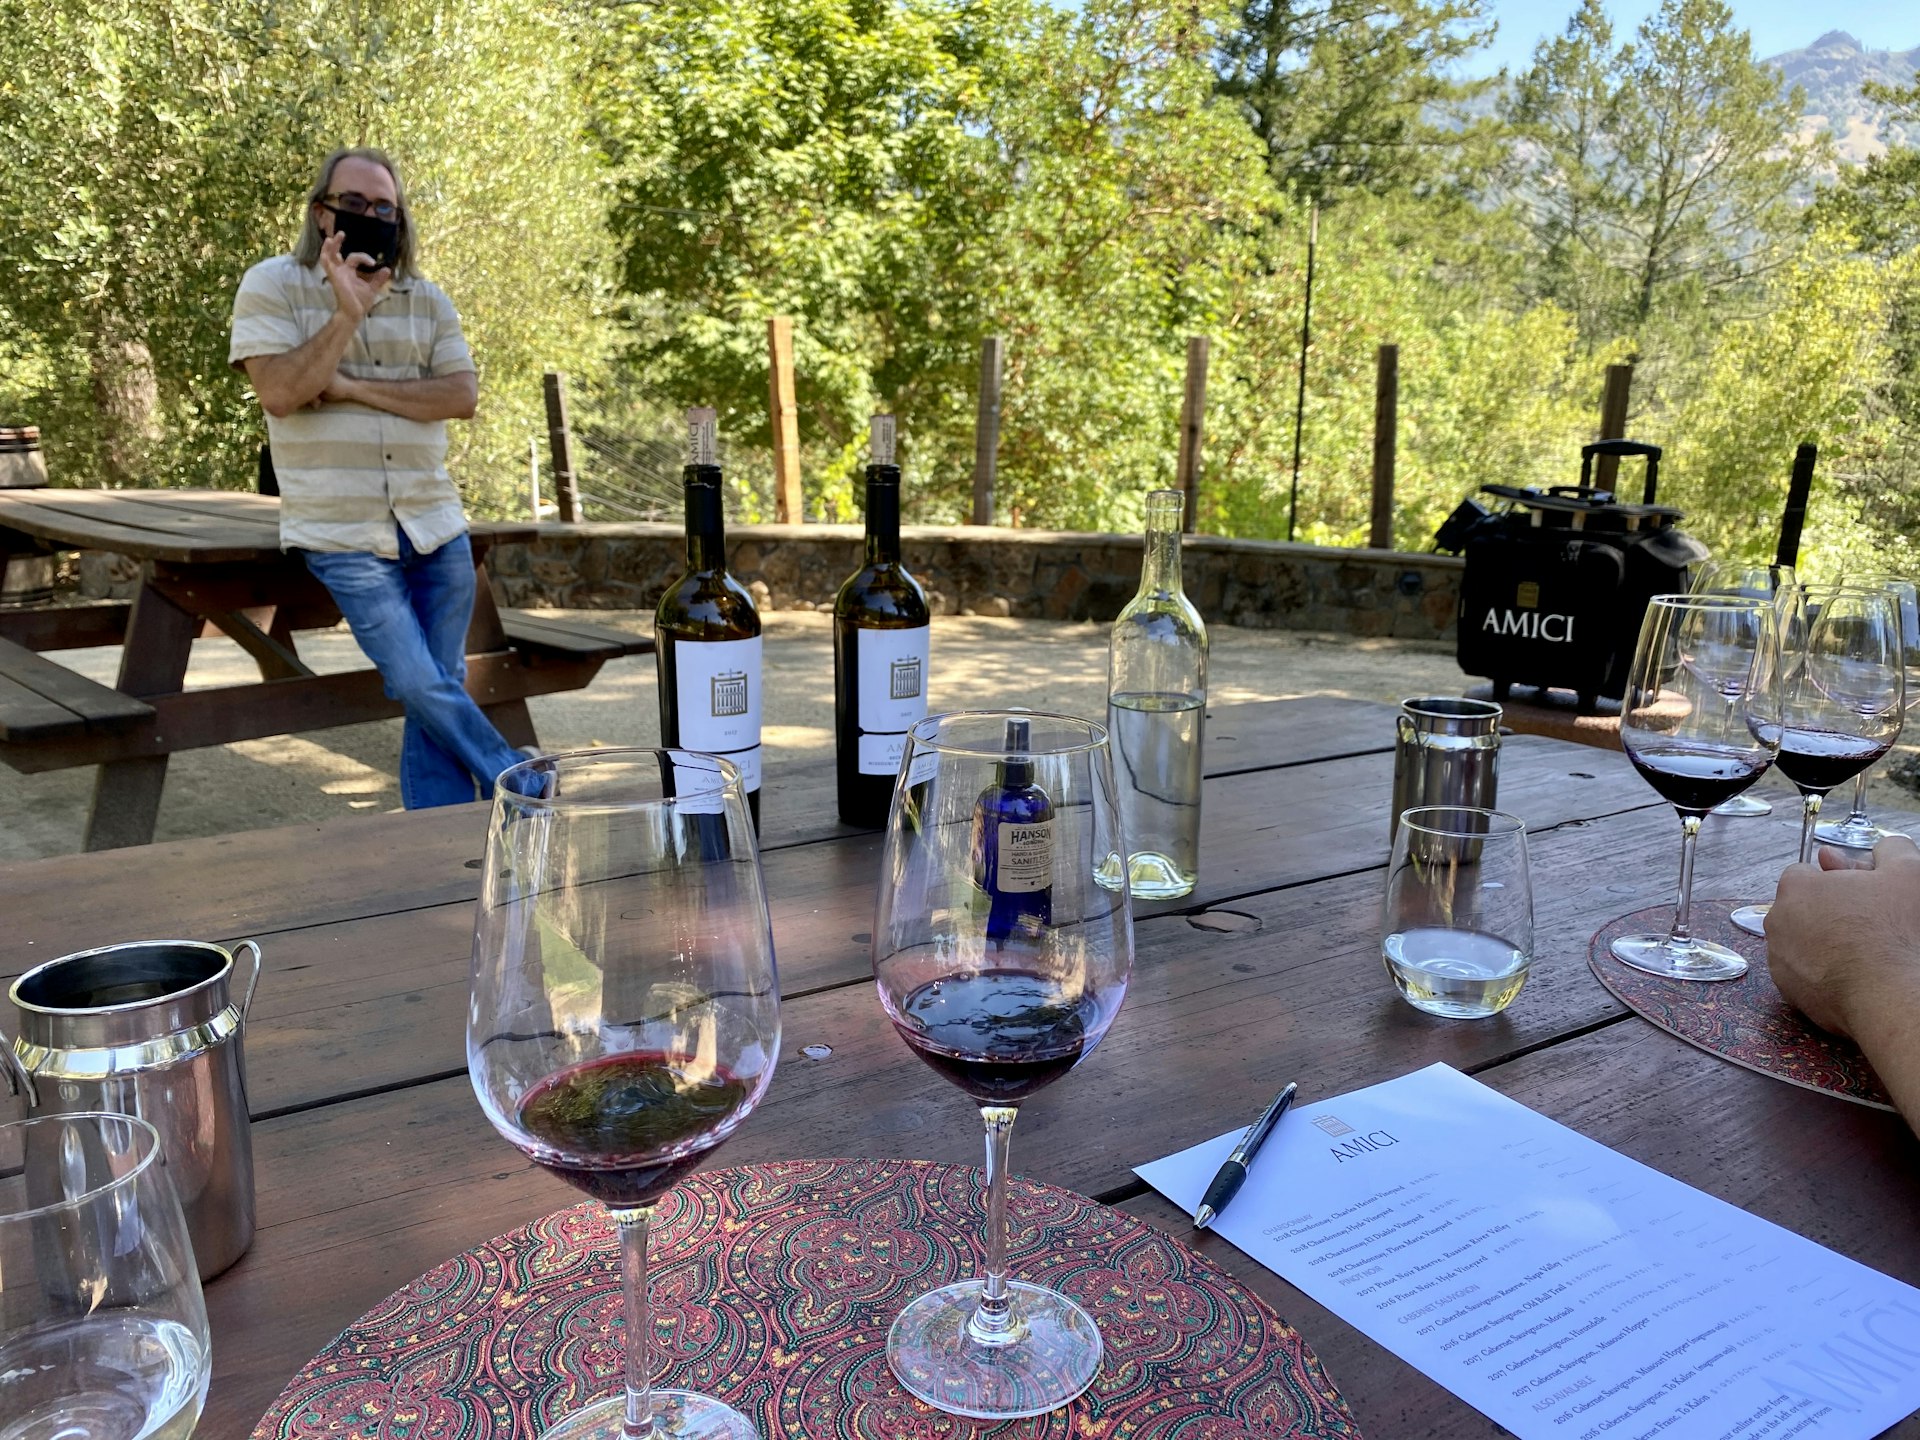 Masks and social distancing are part of the wine tasting experience at California wineries